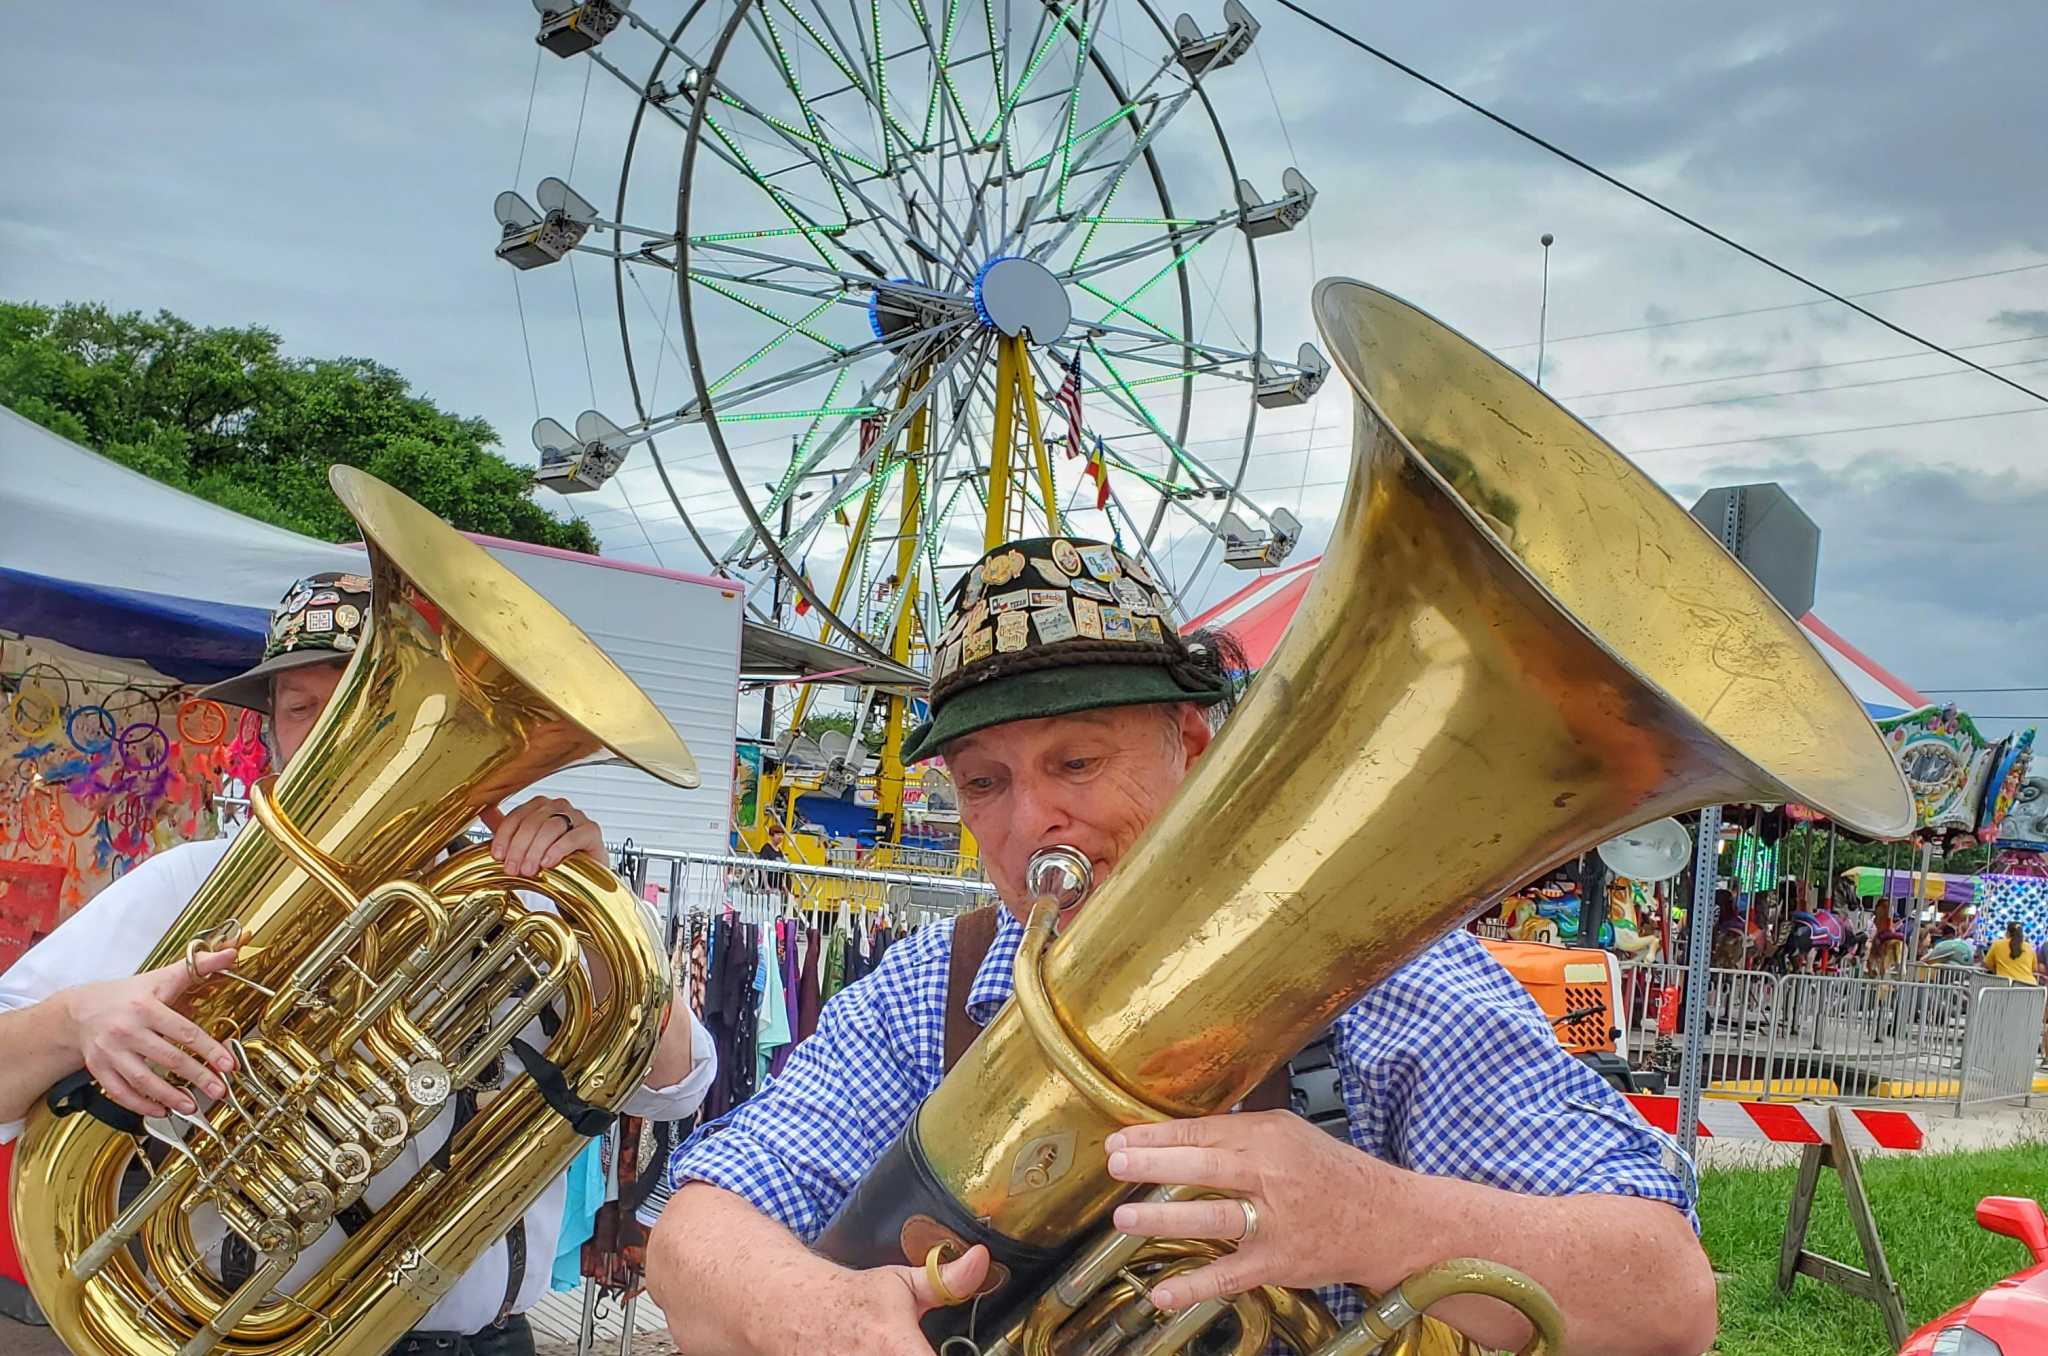 See scenes from this year’s Tomball German Heritage Festival